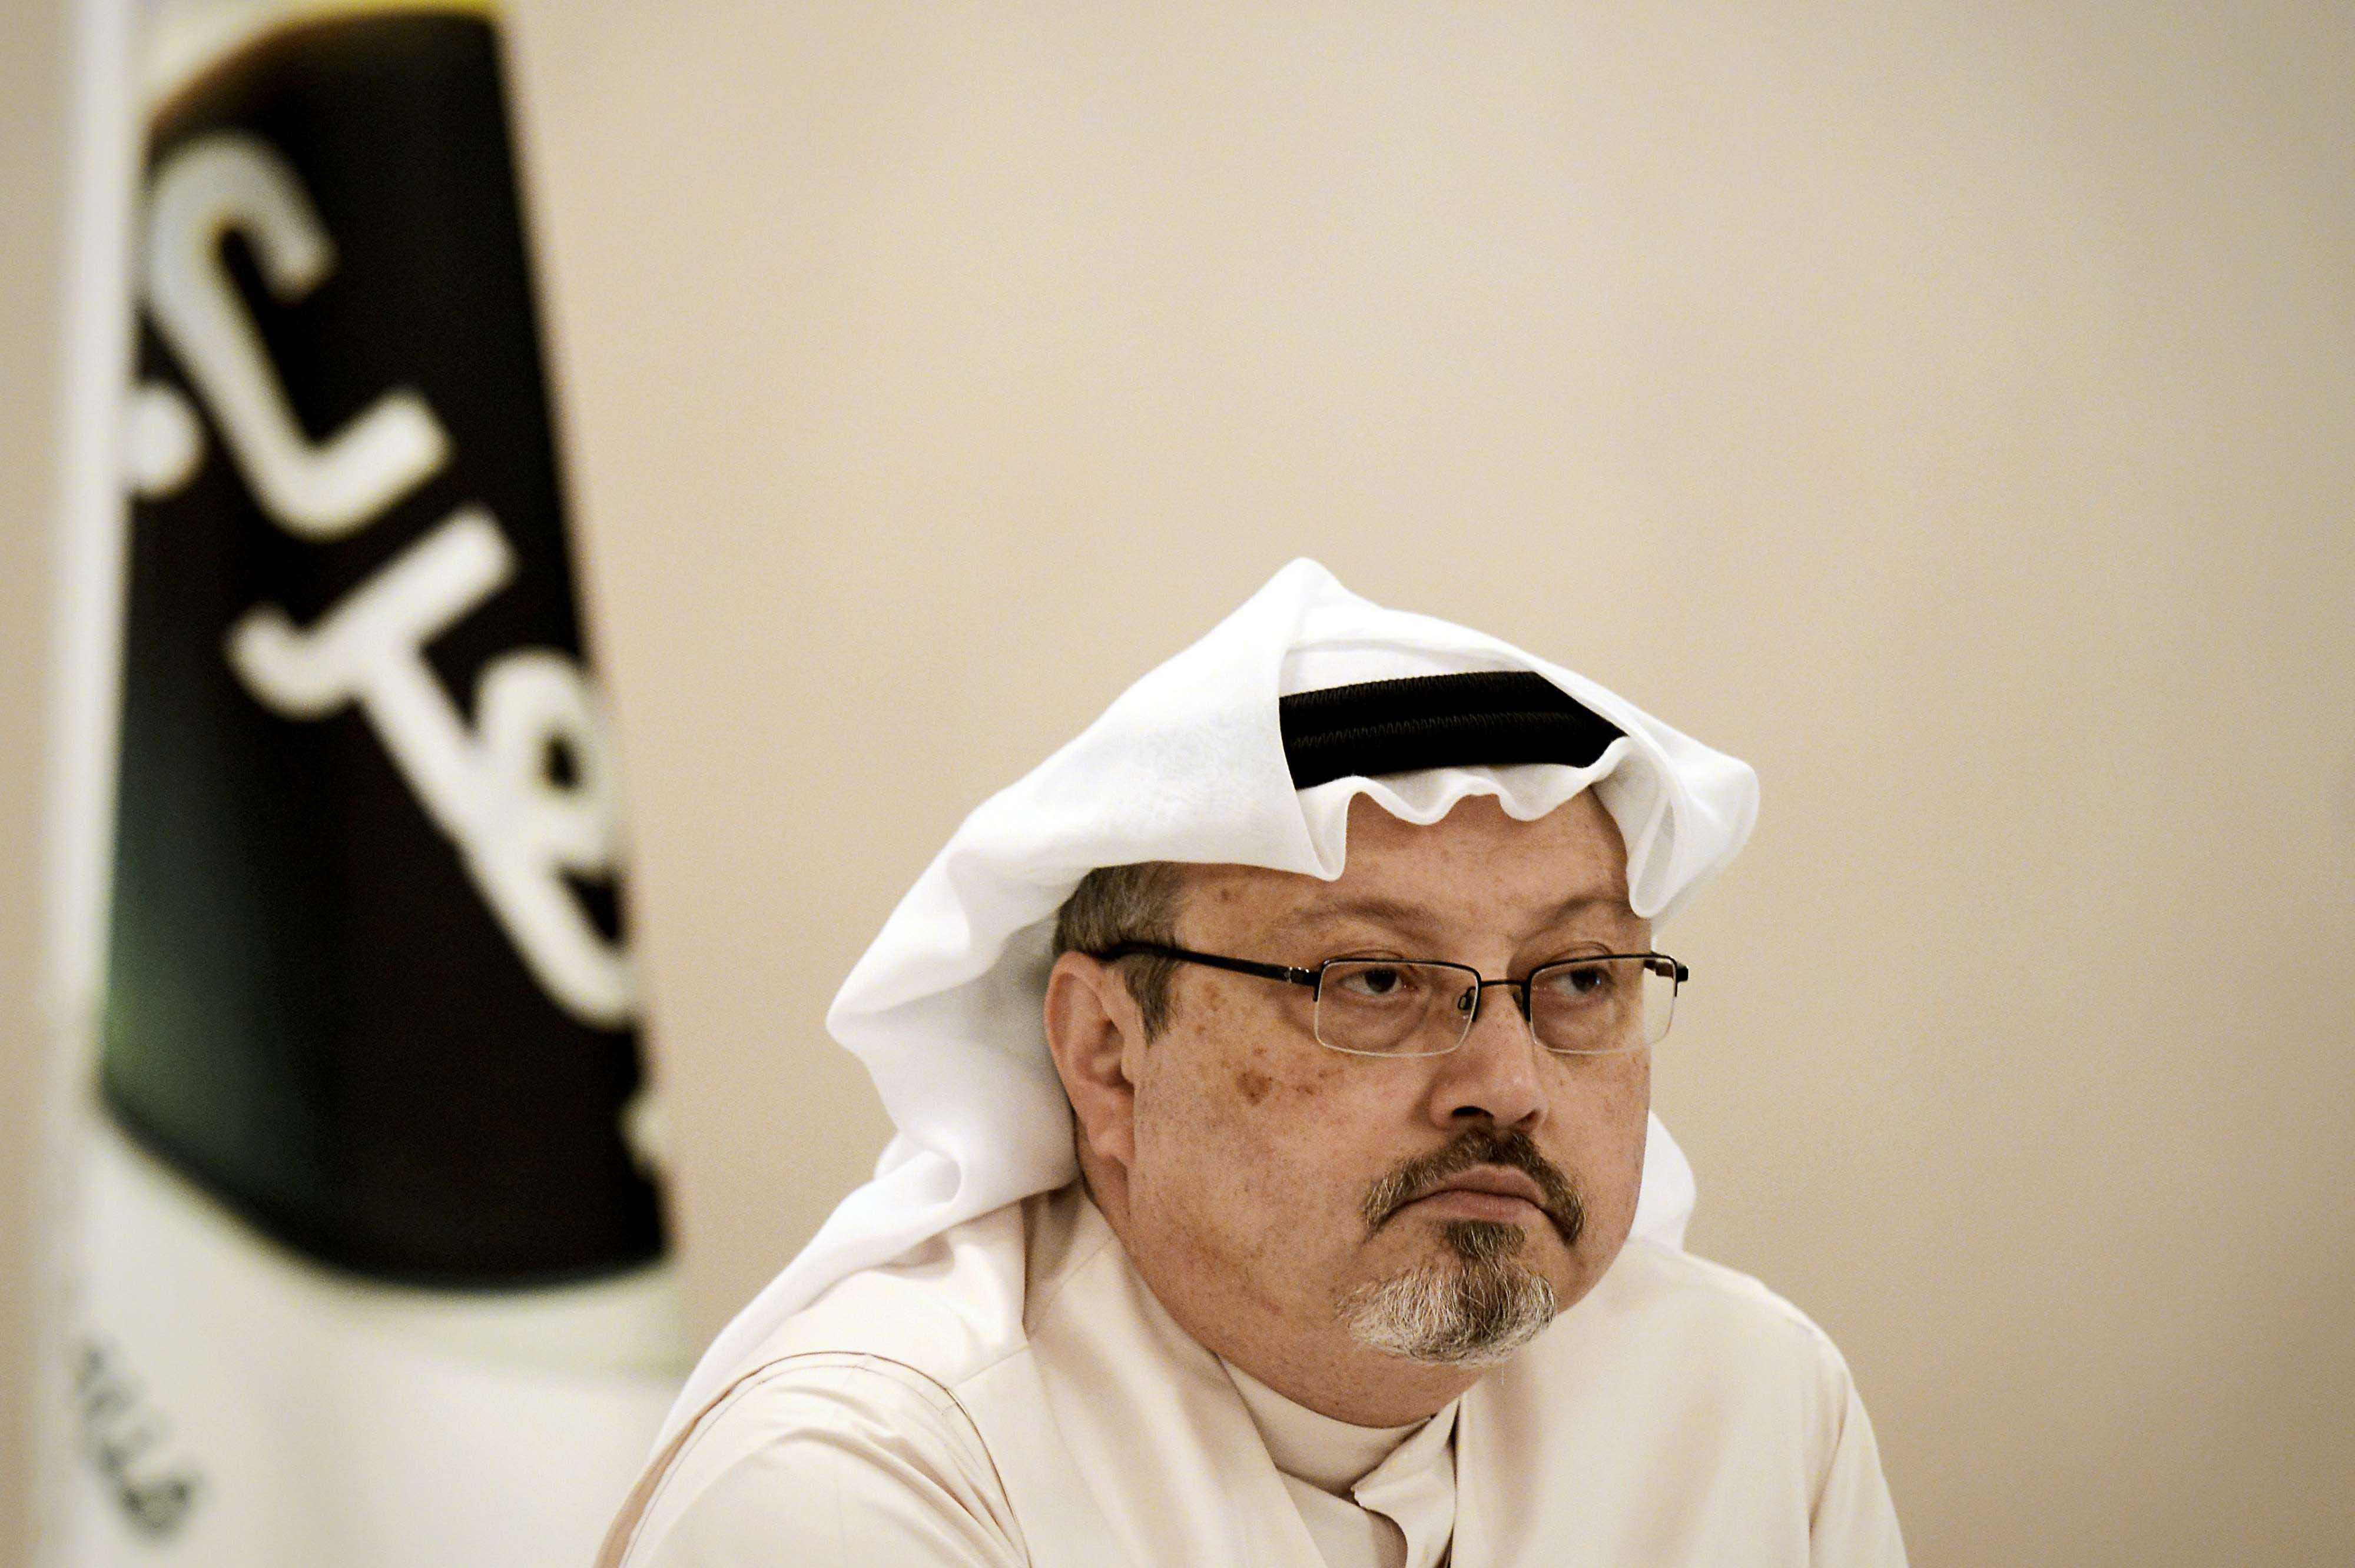 The remains of Khashoggi's body have not been found.